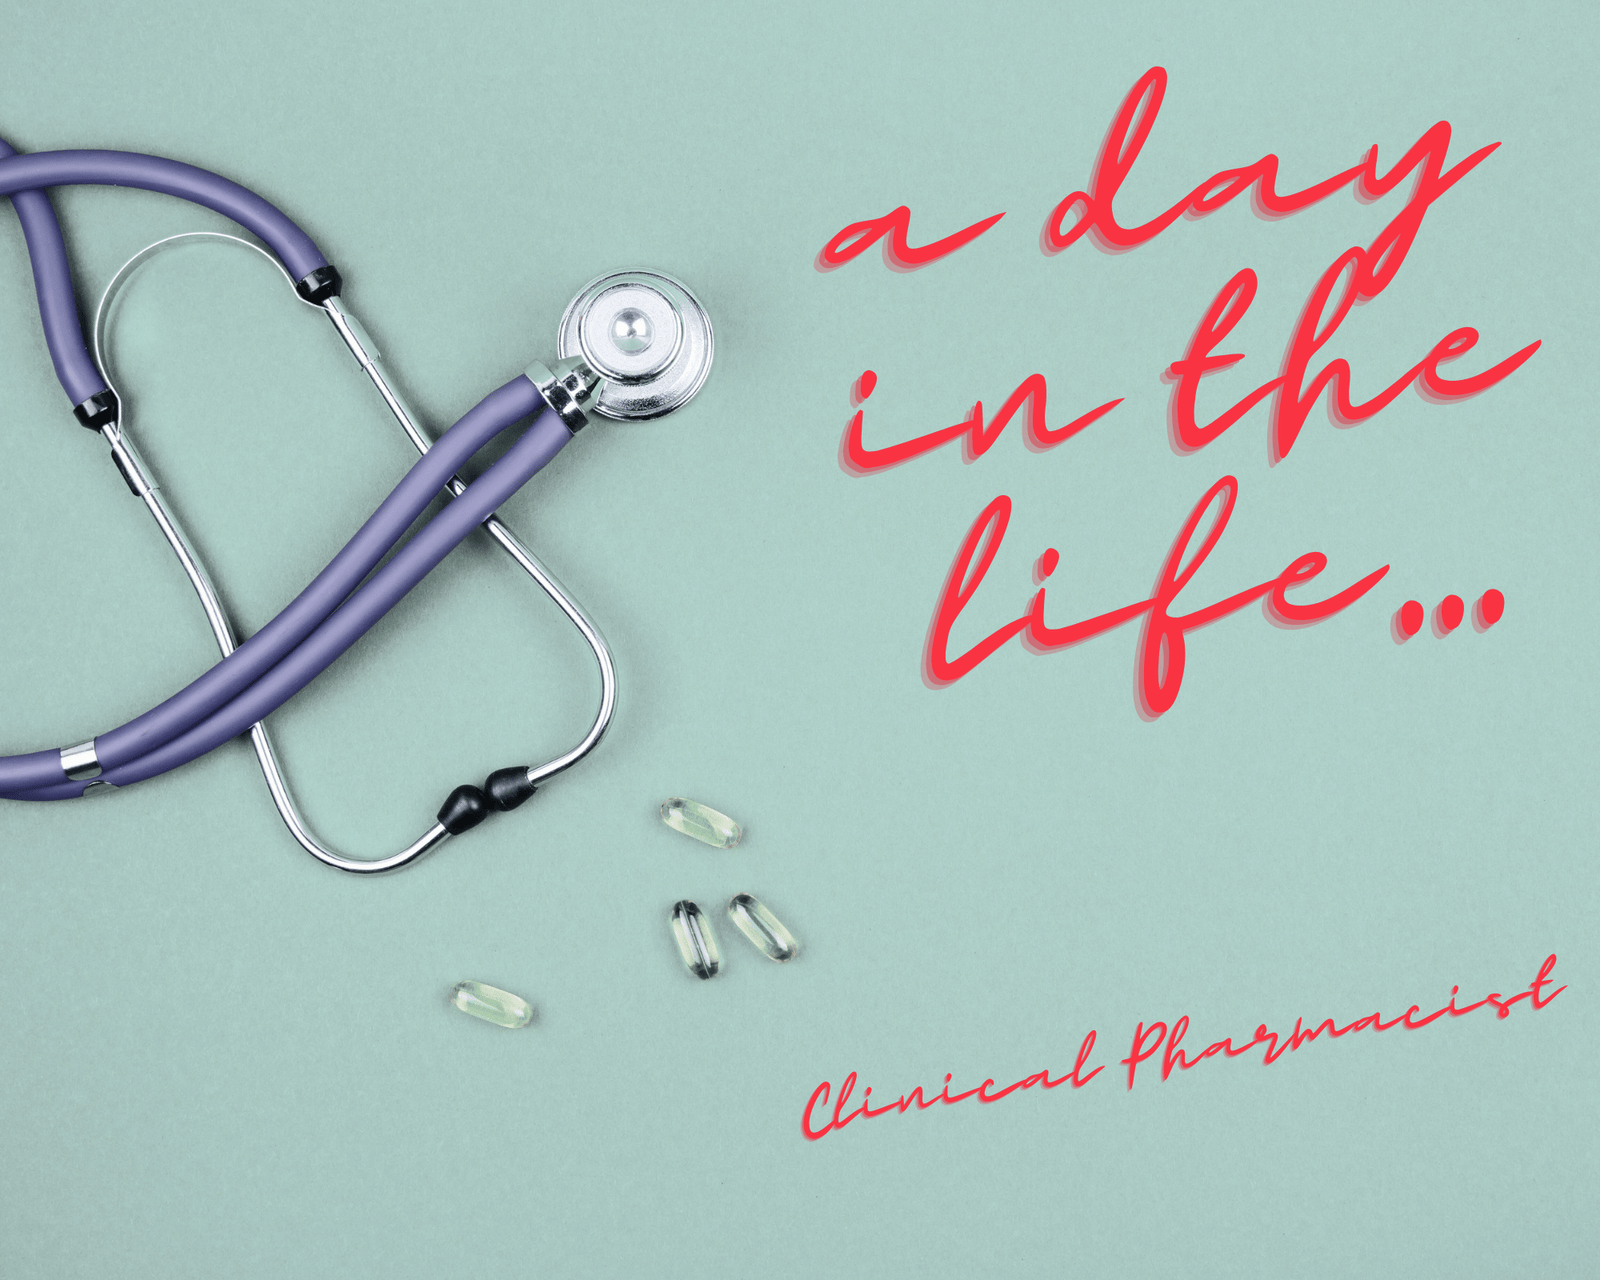 A day in the life...clinical pharmacist. An image with a stethoscope and pills